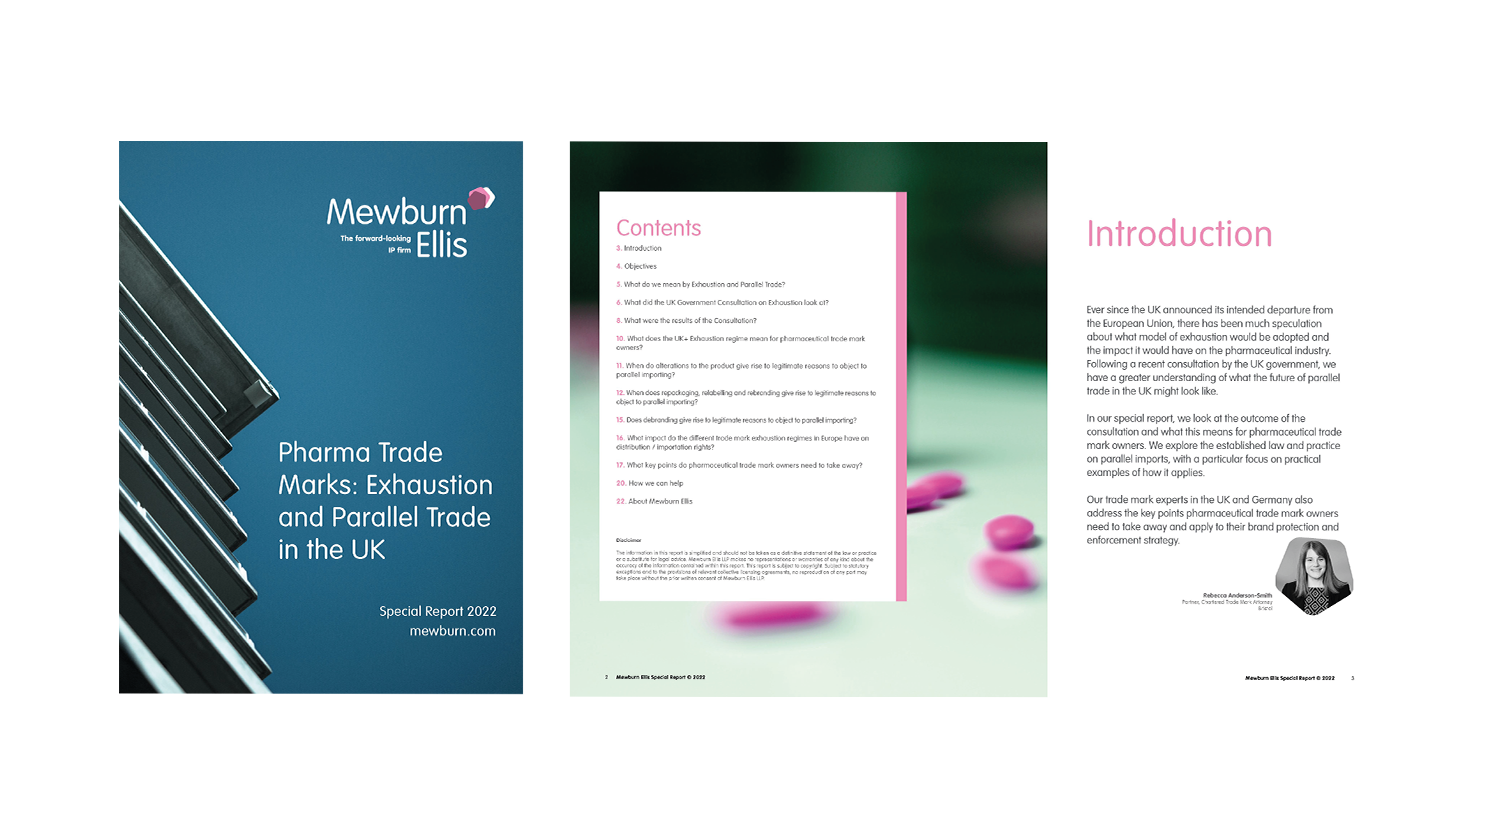 Pharma Trade Marks - Exhaustion and Parallel Trade in the UK4